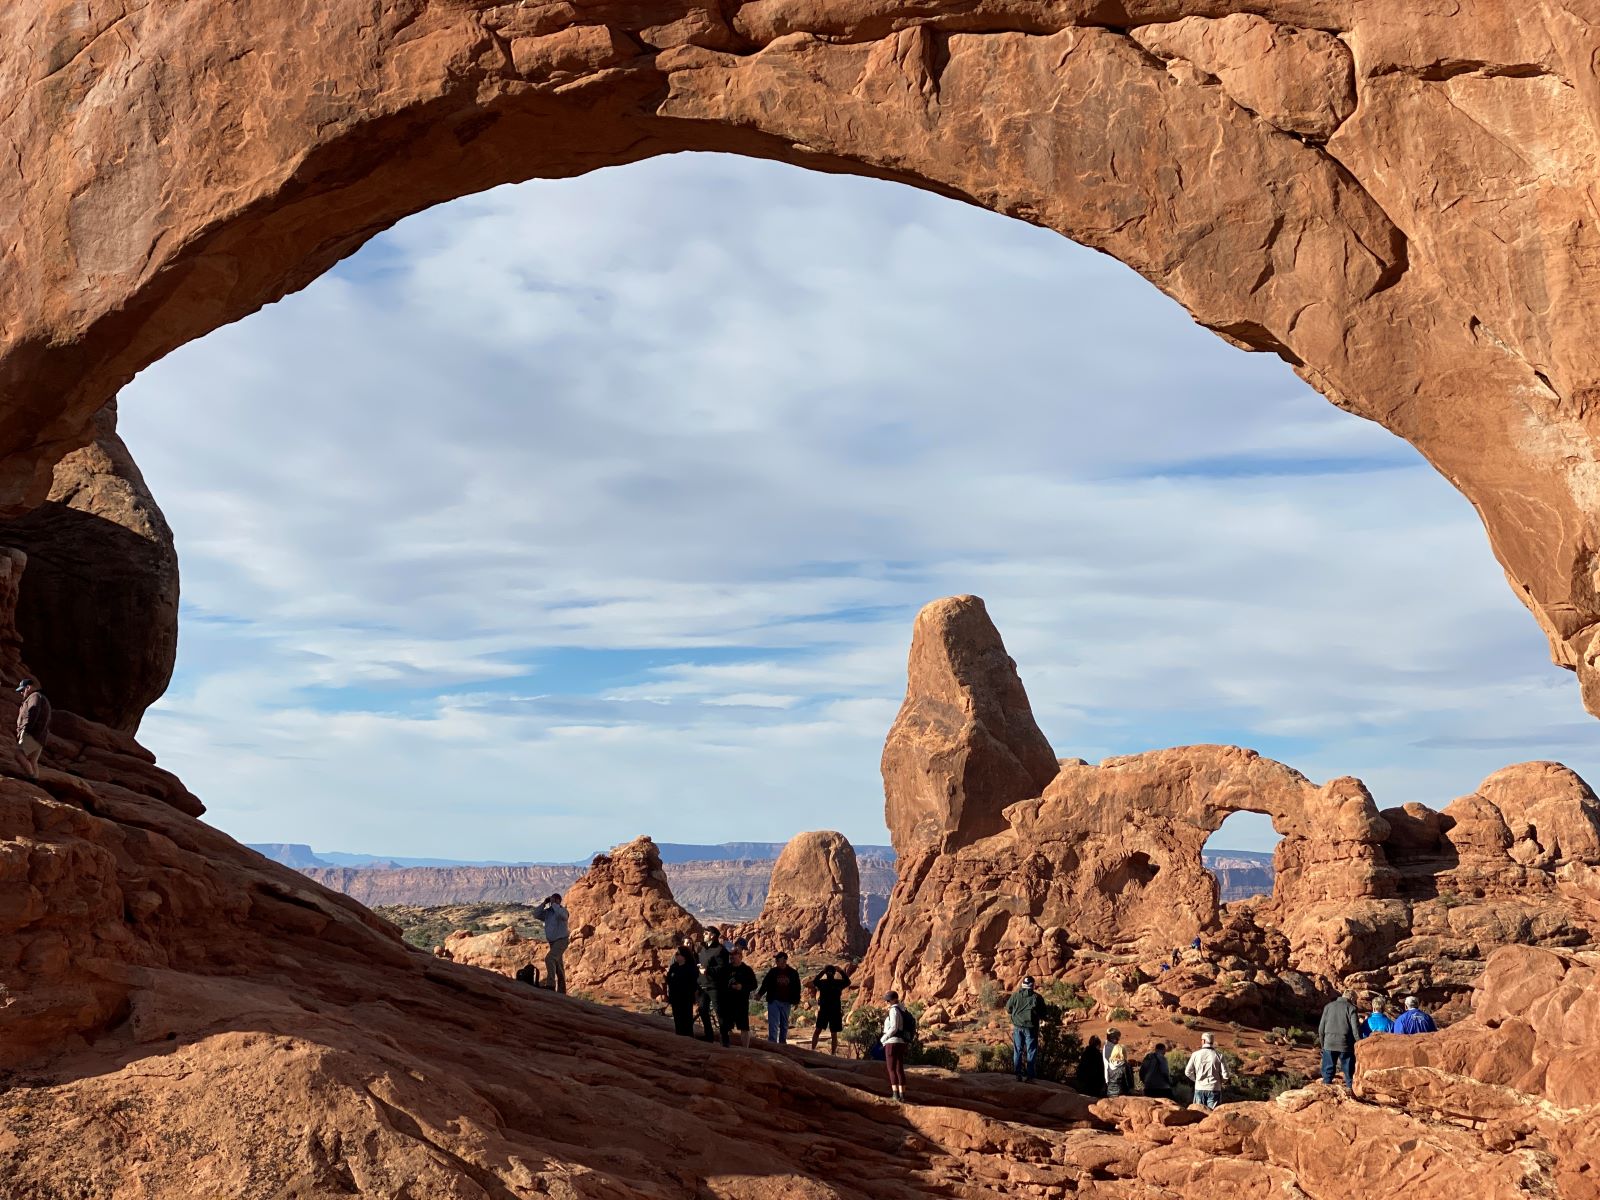 Turret Arch from the North Window. Arches National Park. Credit: Christian Bergara